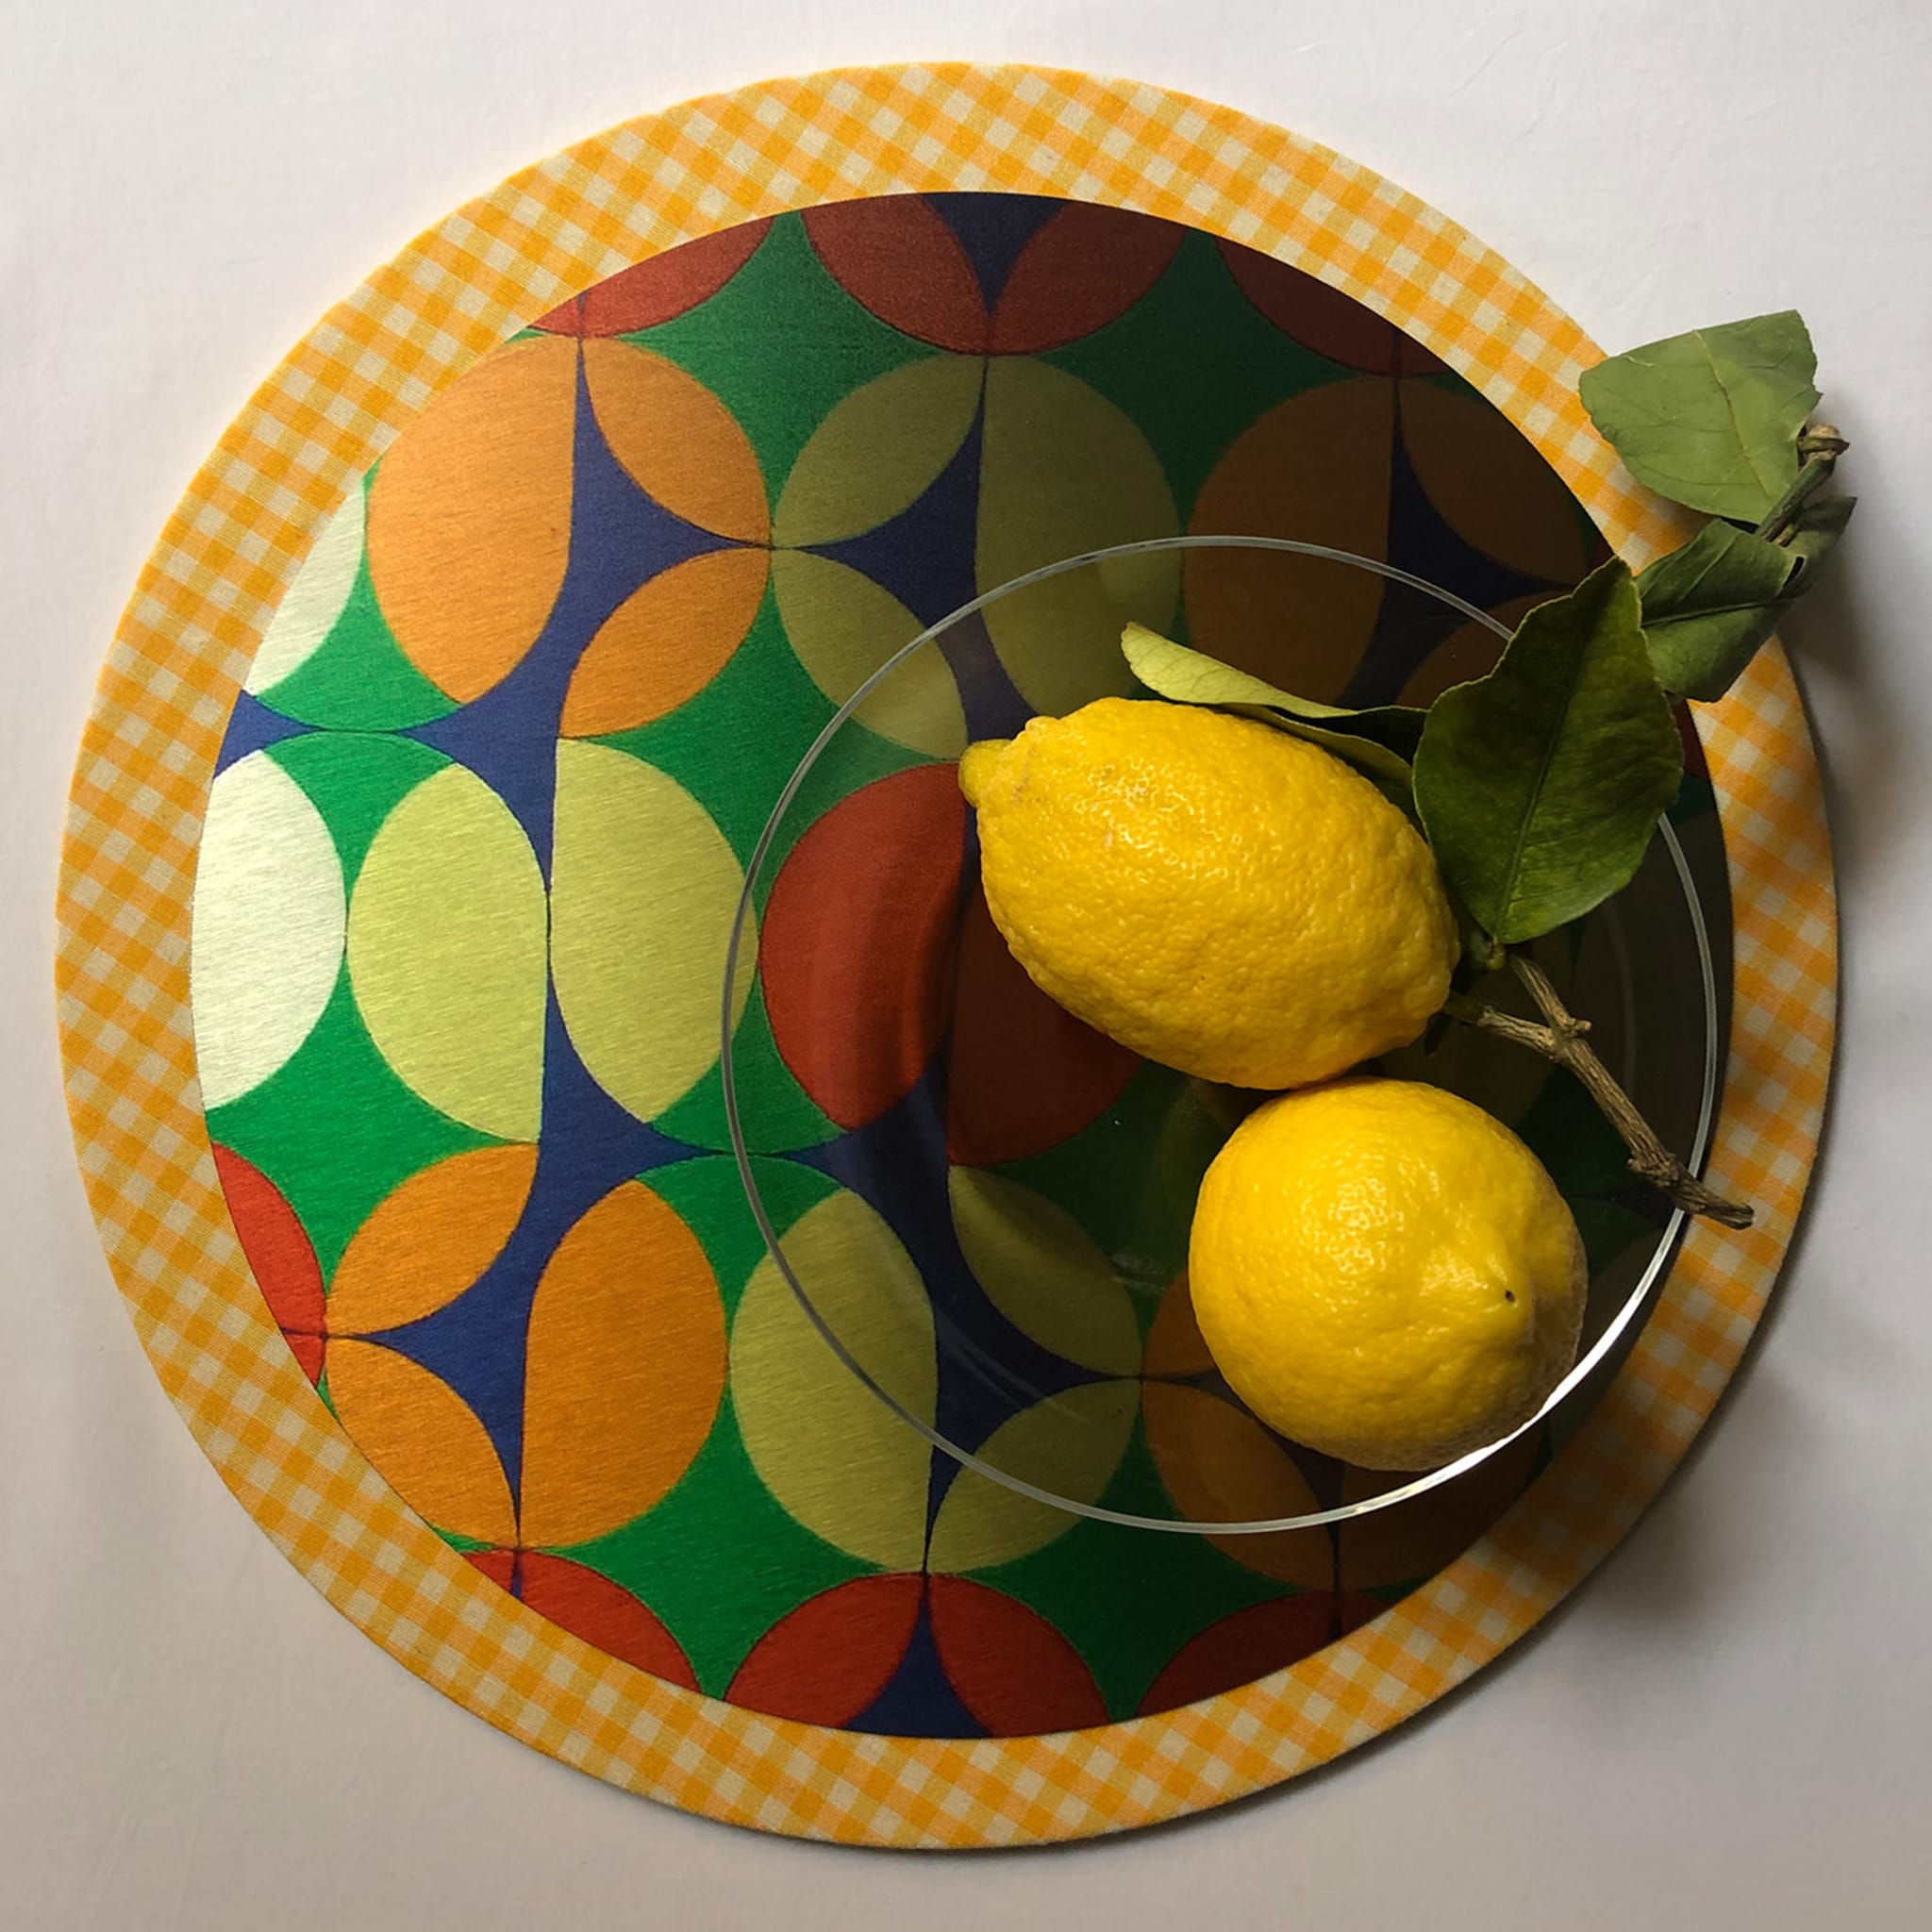 Cuffiette Yellow and White Placemat - Alternative view 1